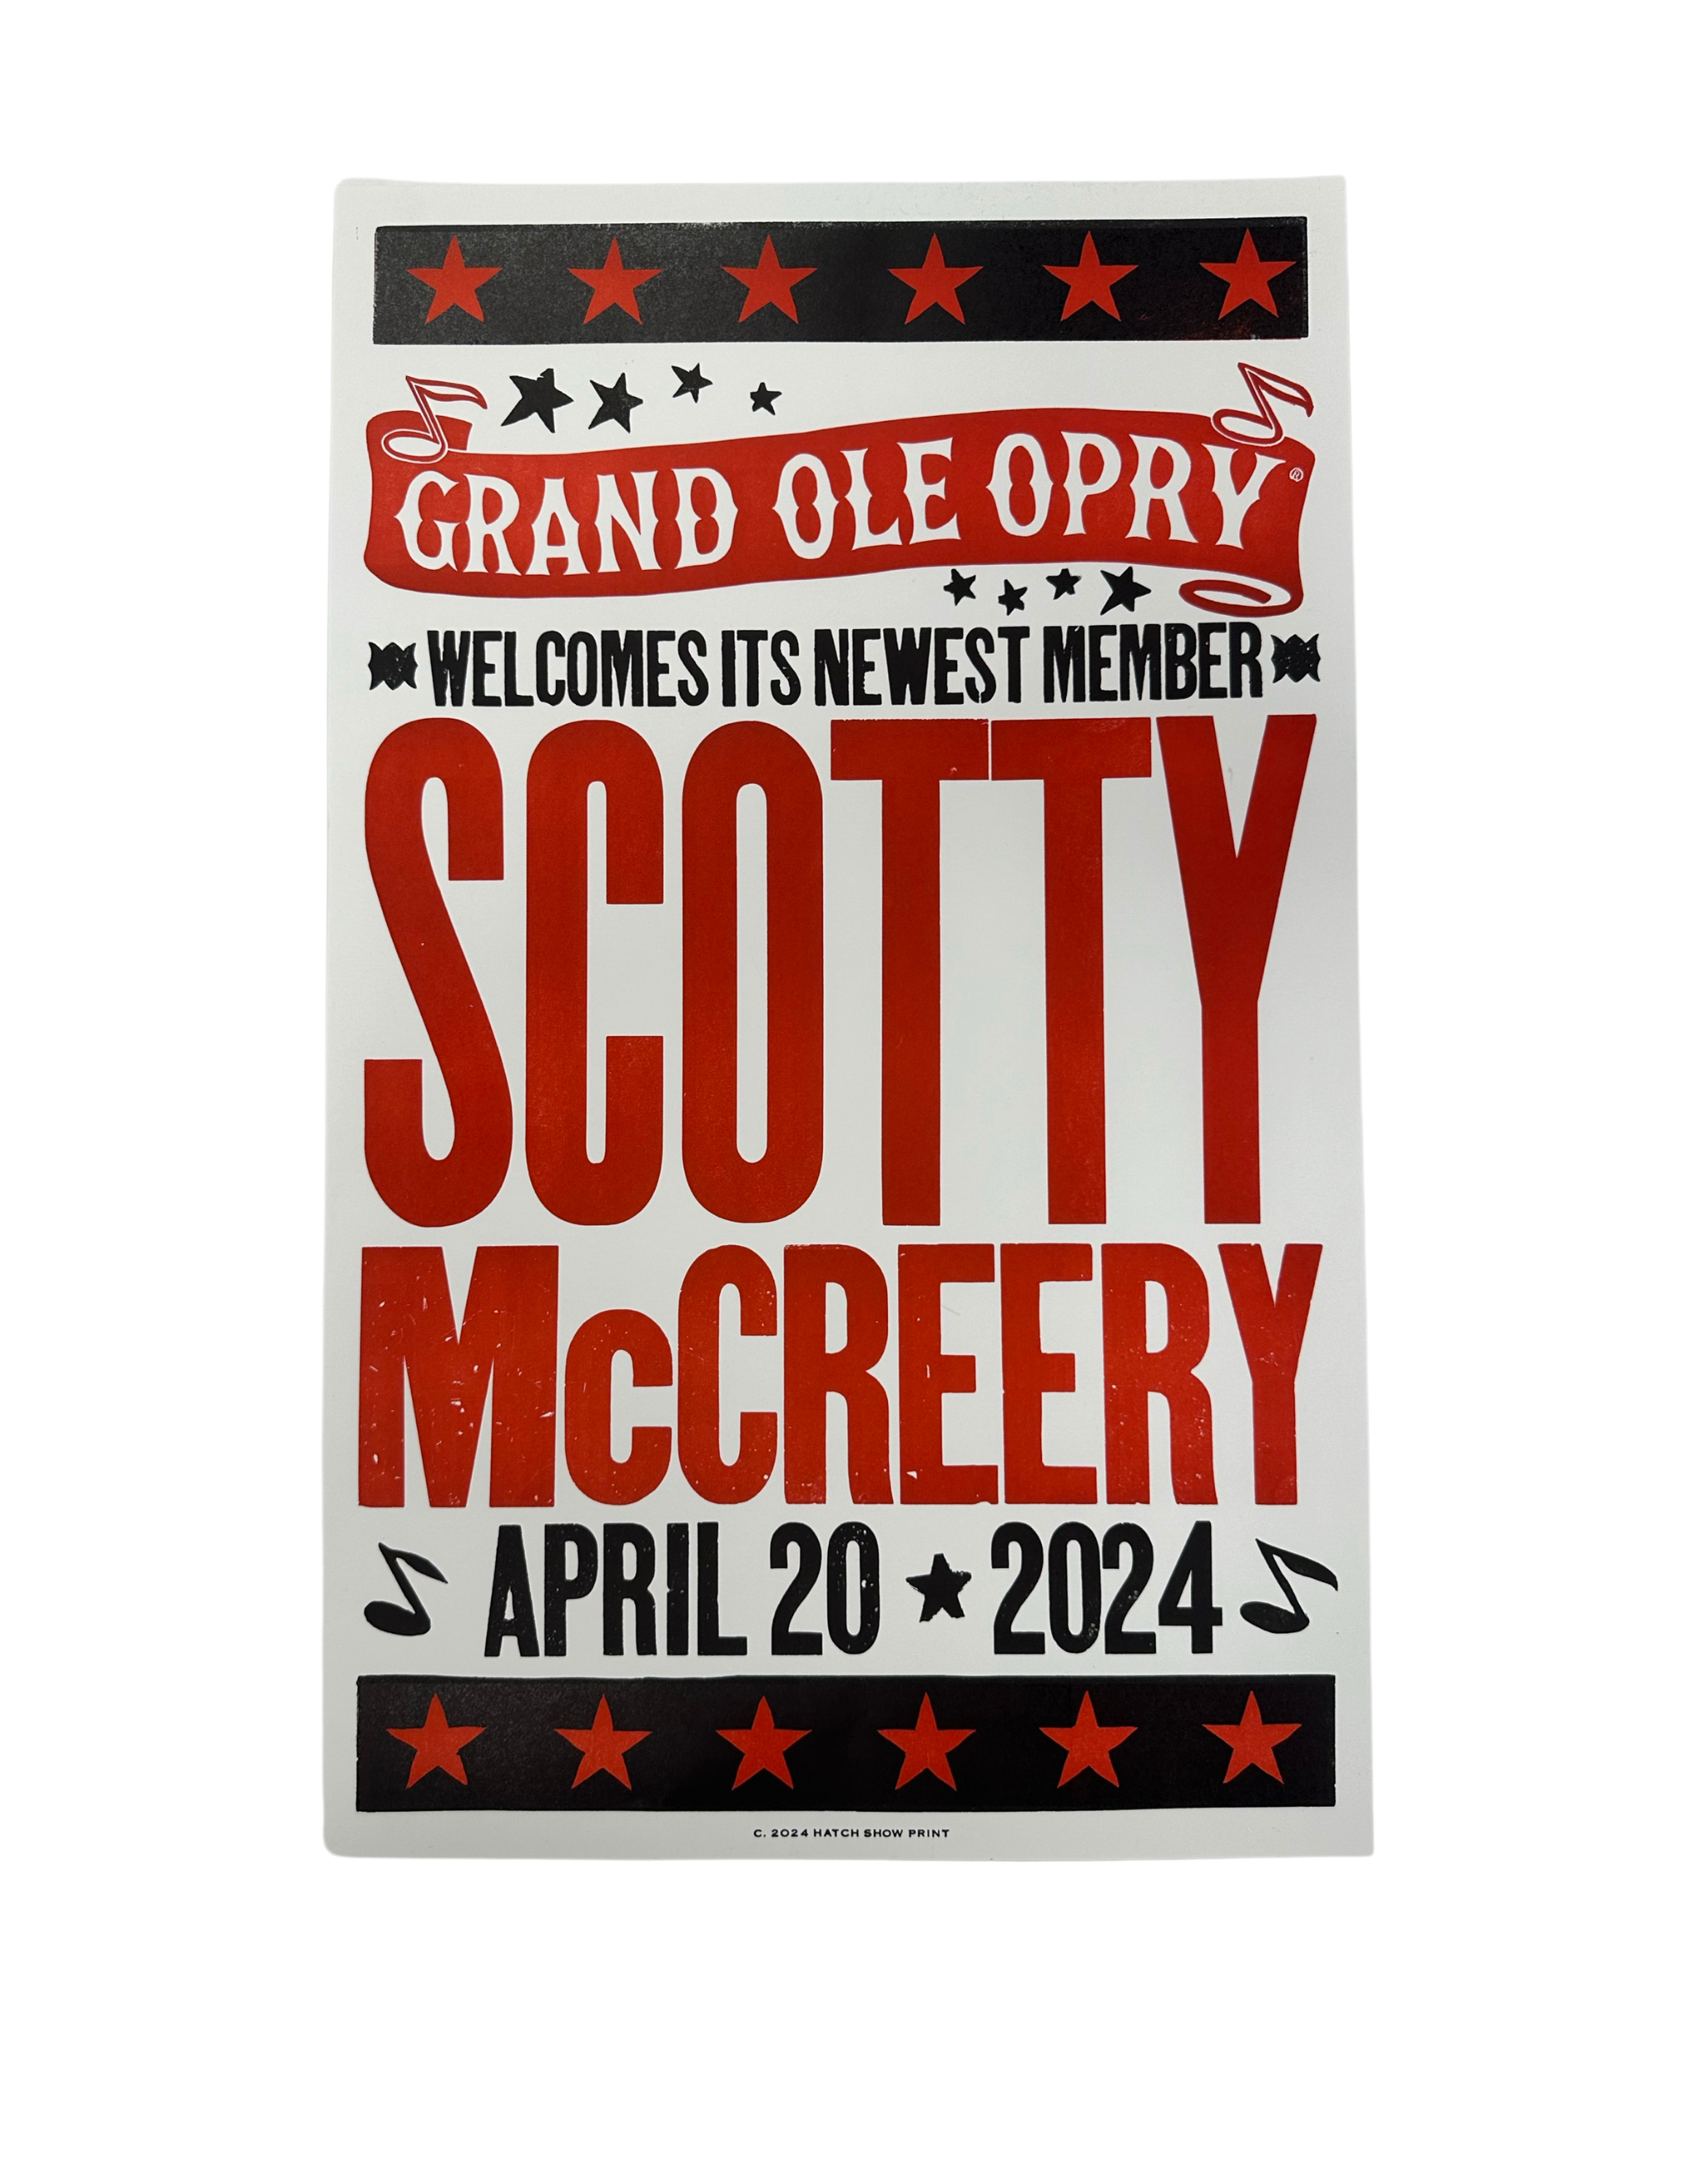 Scotty McCreery Official Opry Induction Hatch Show Print